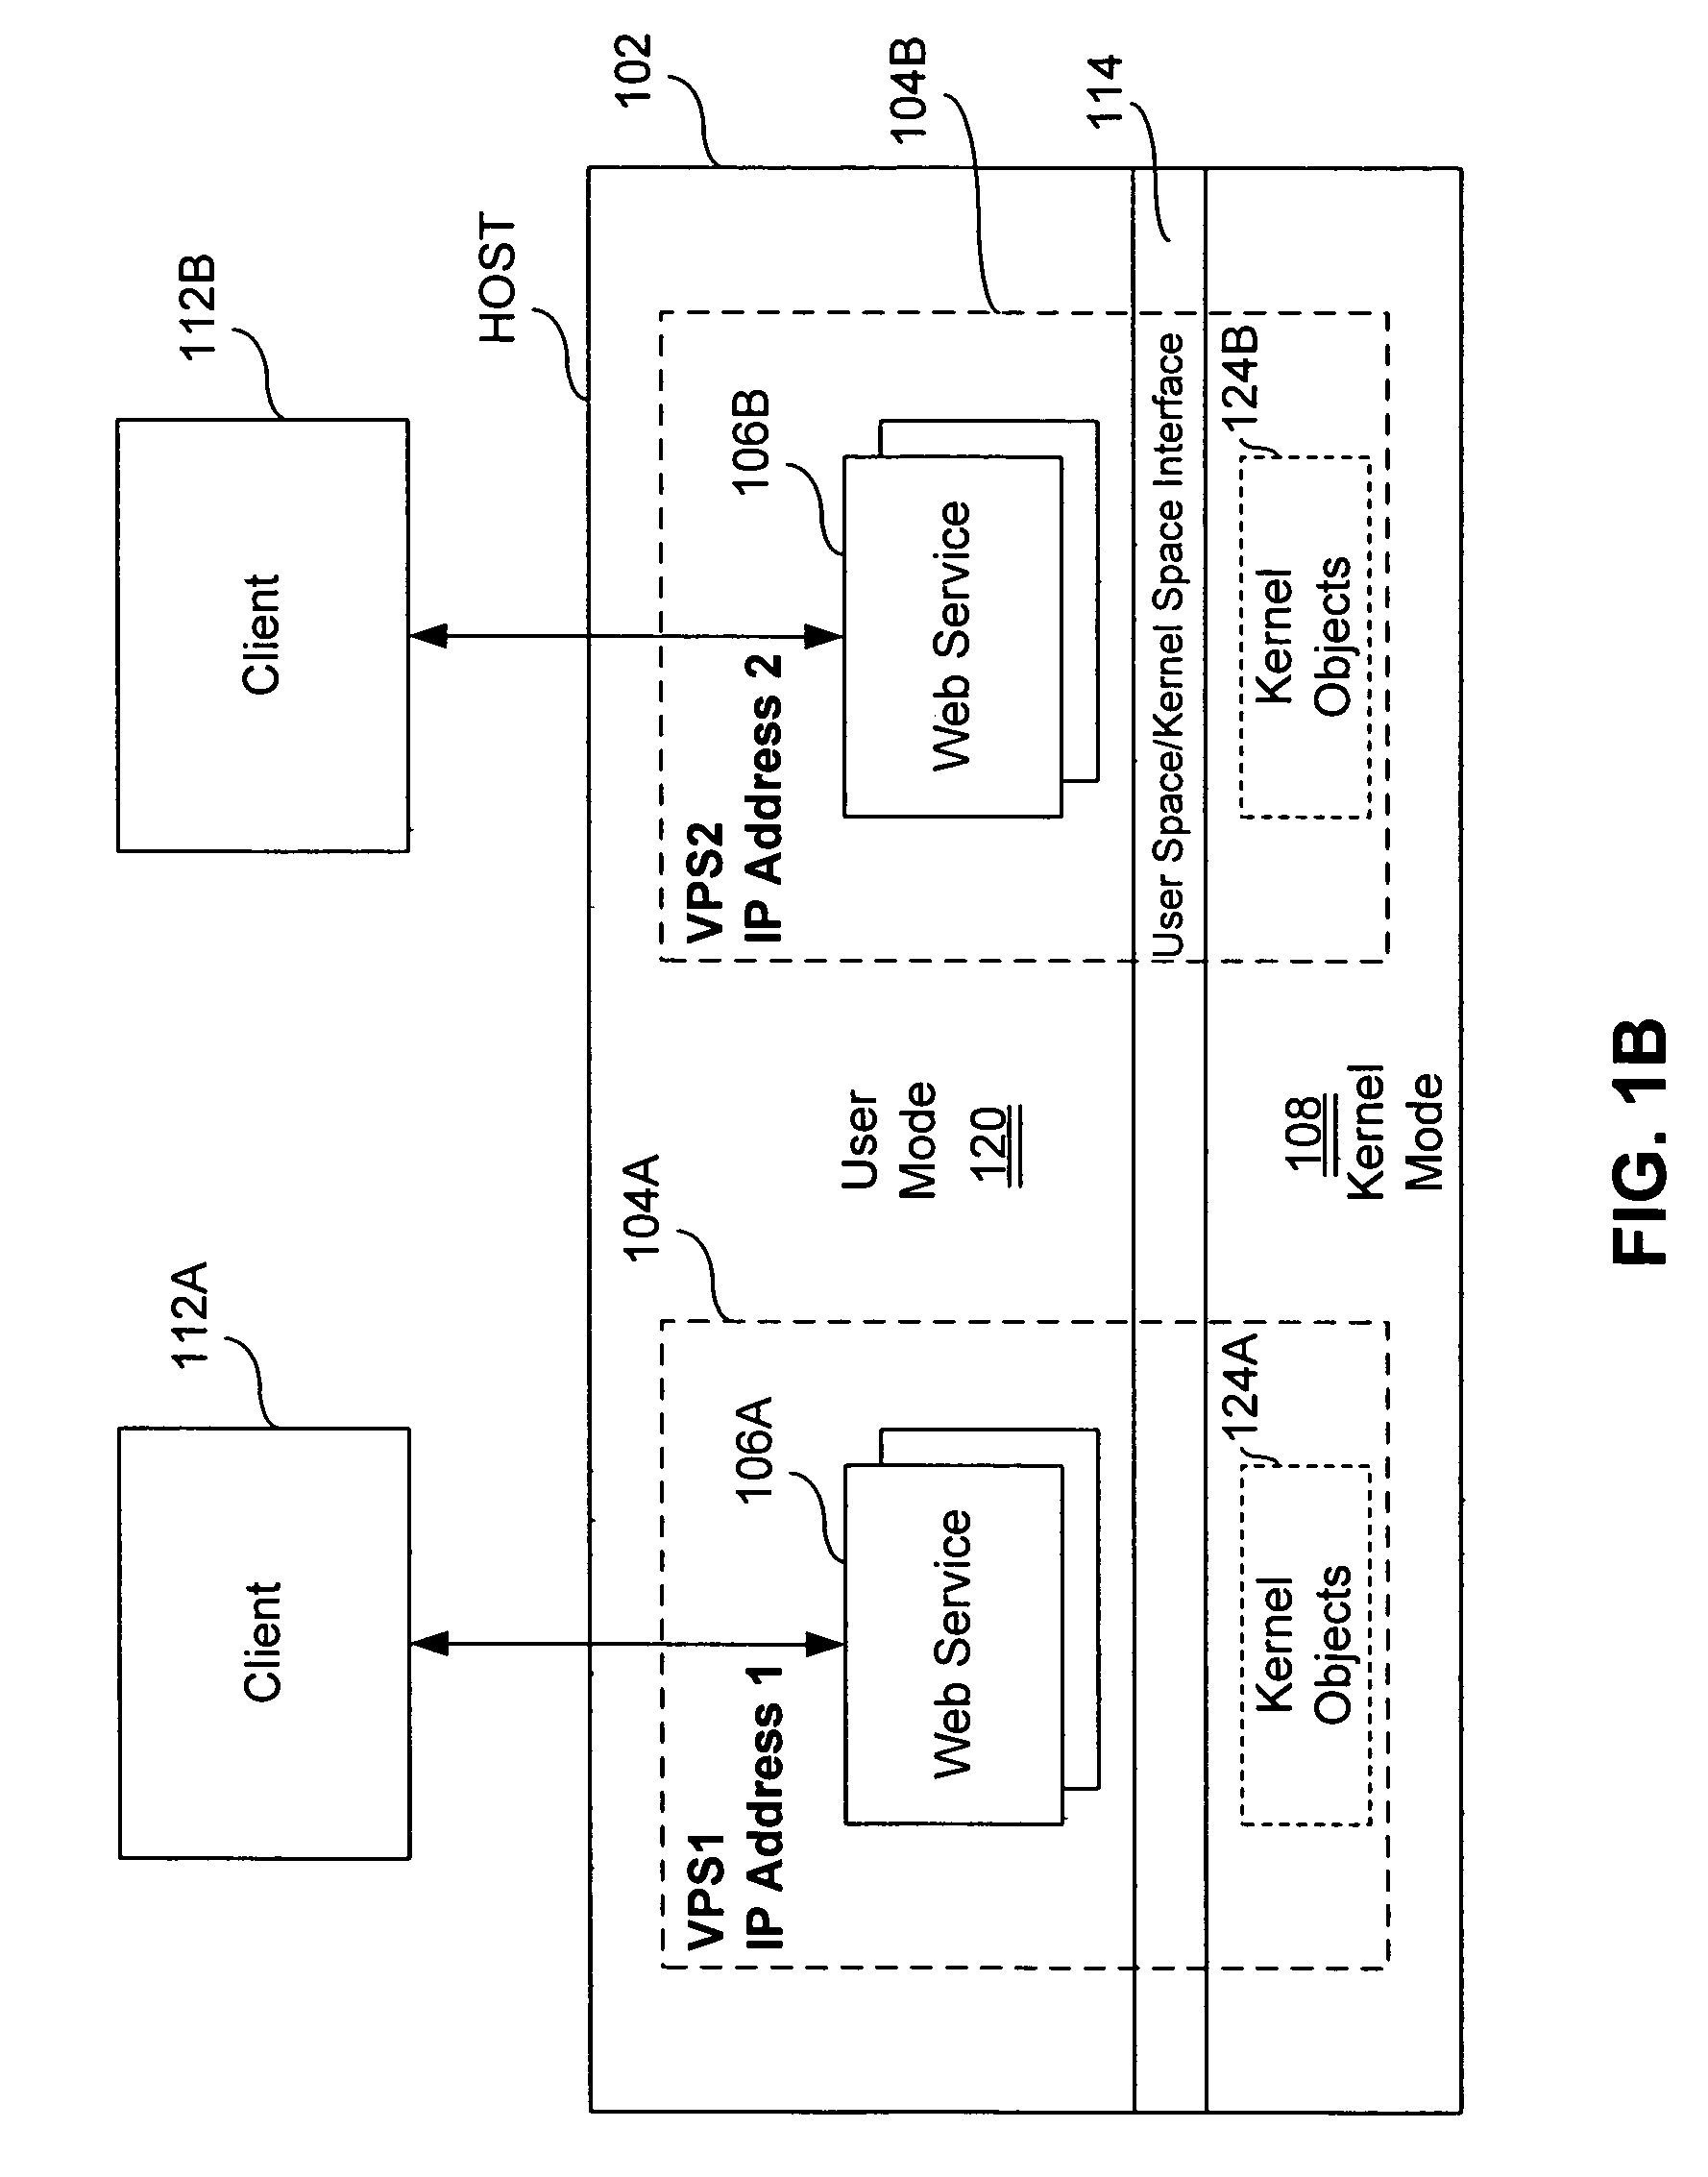 Virtual private server with isolation of system components